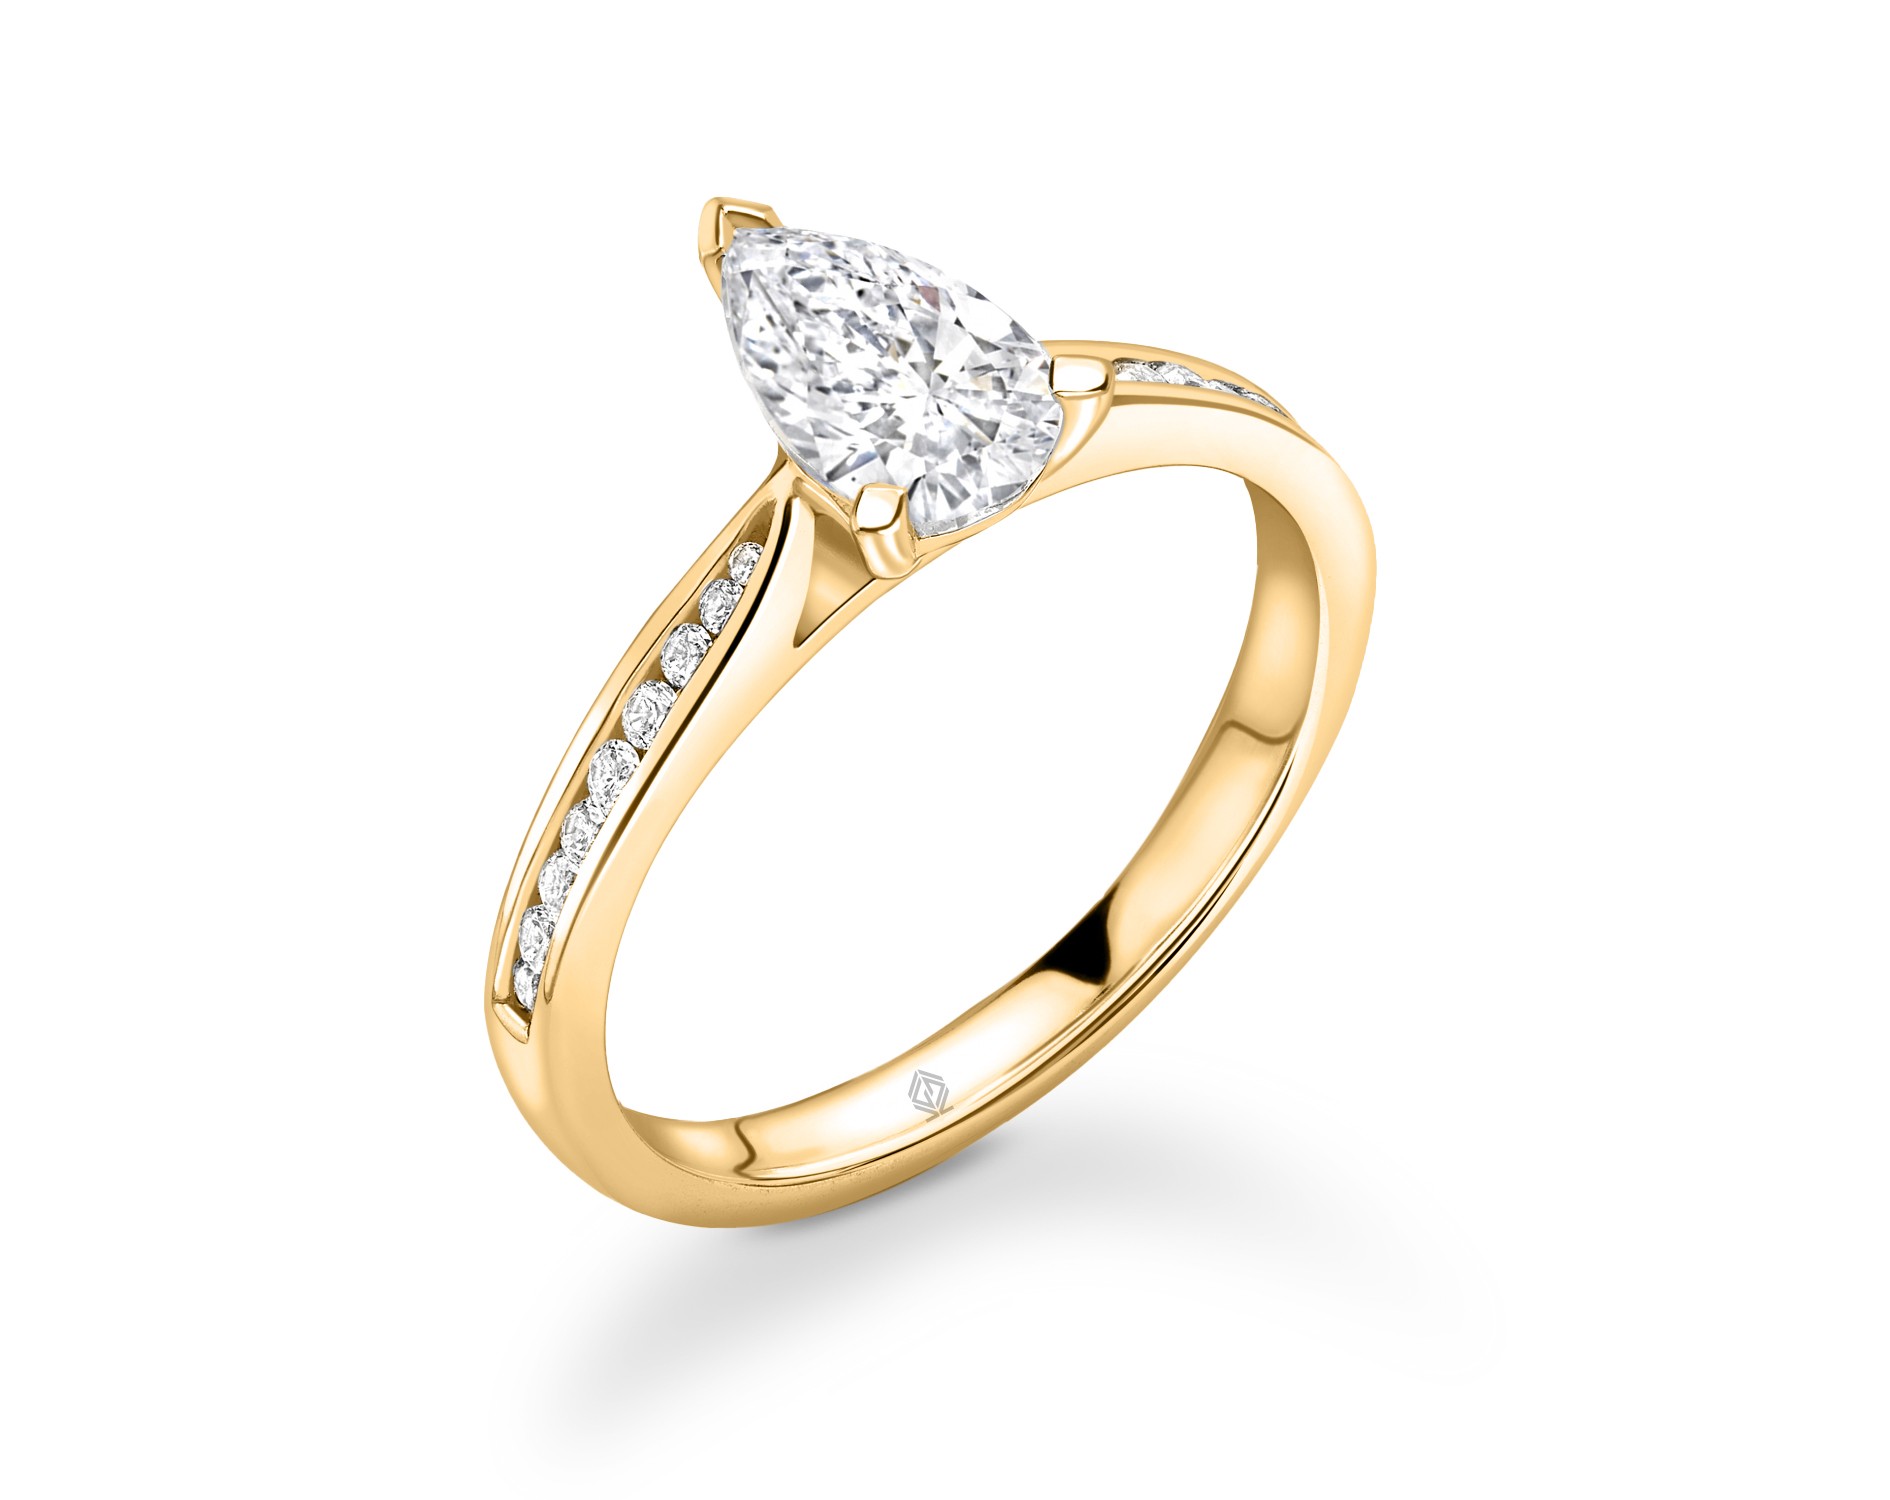 18K YELLOW GOLD PEAR CUT DIAMOND ENGAGEMENT RING WITH SIDE STONES CHANNEL SET